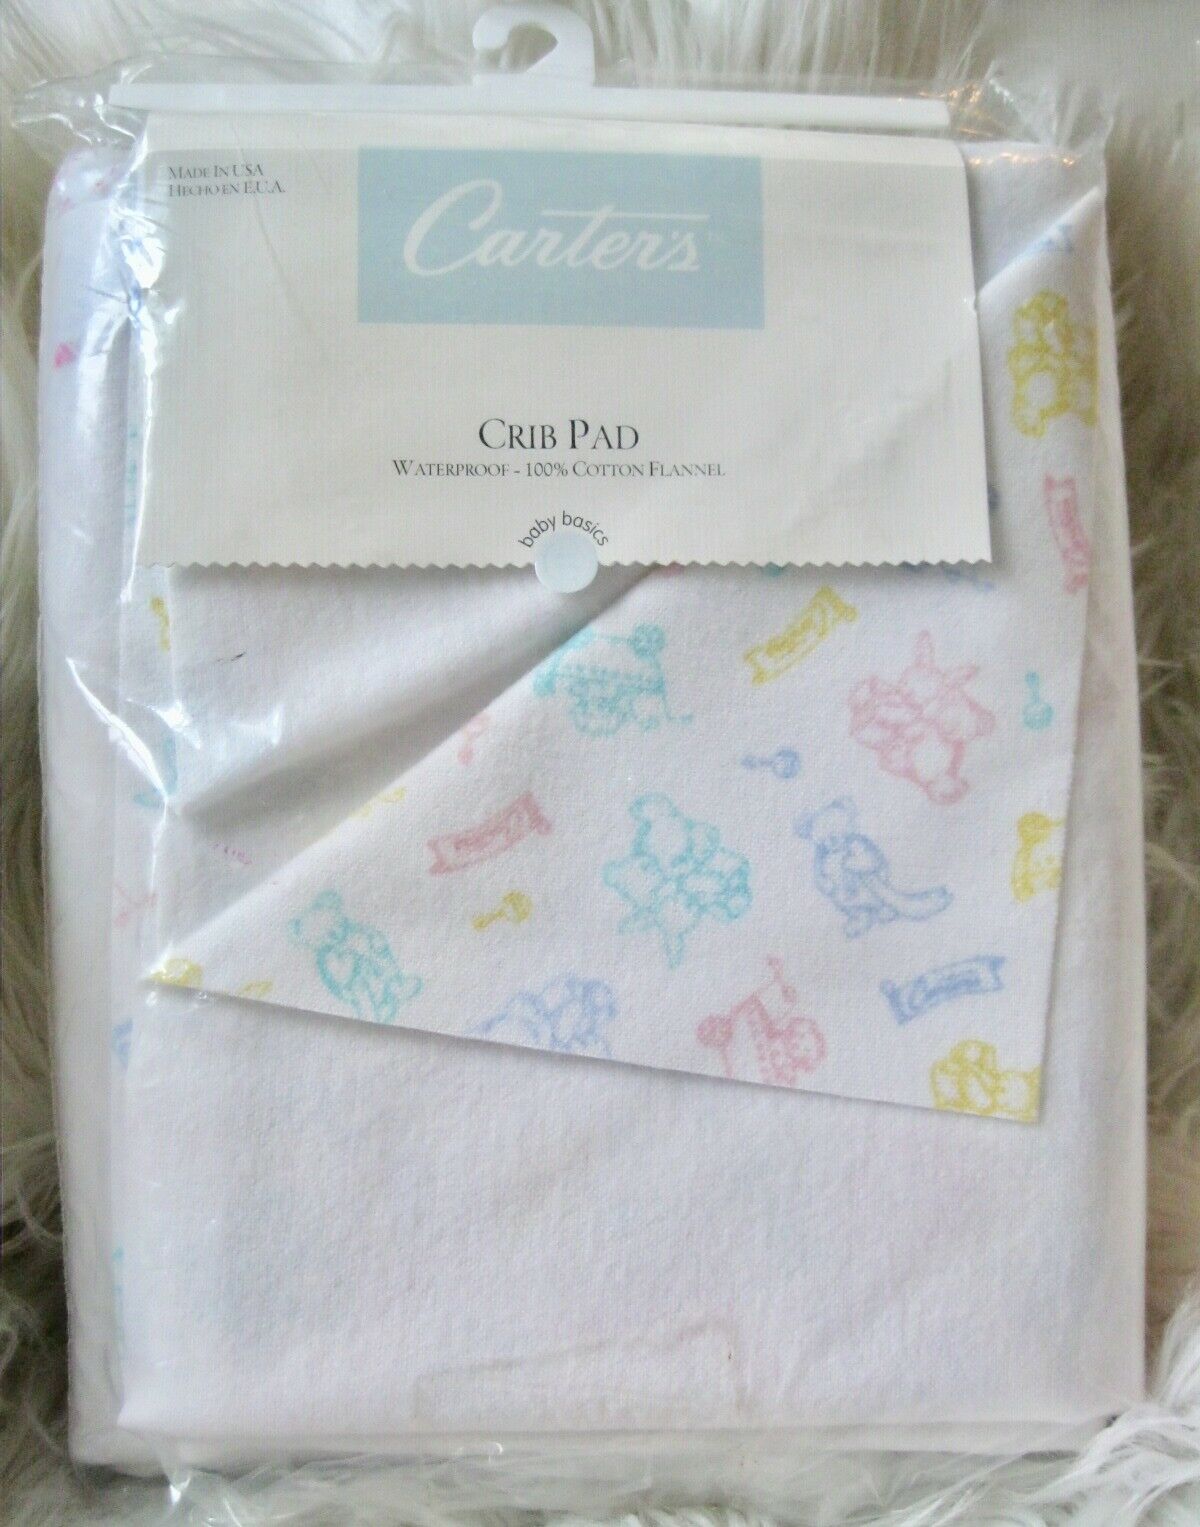 Nos Carters Crib Changing Pad Pastels Waterproof Cotton Flannel Usa Made New 80s